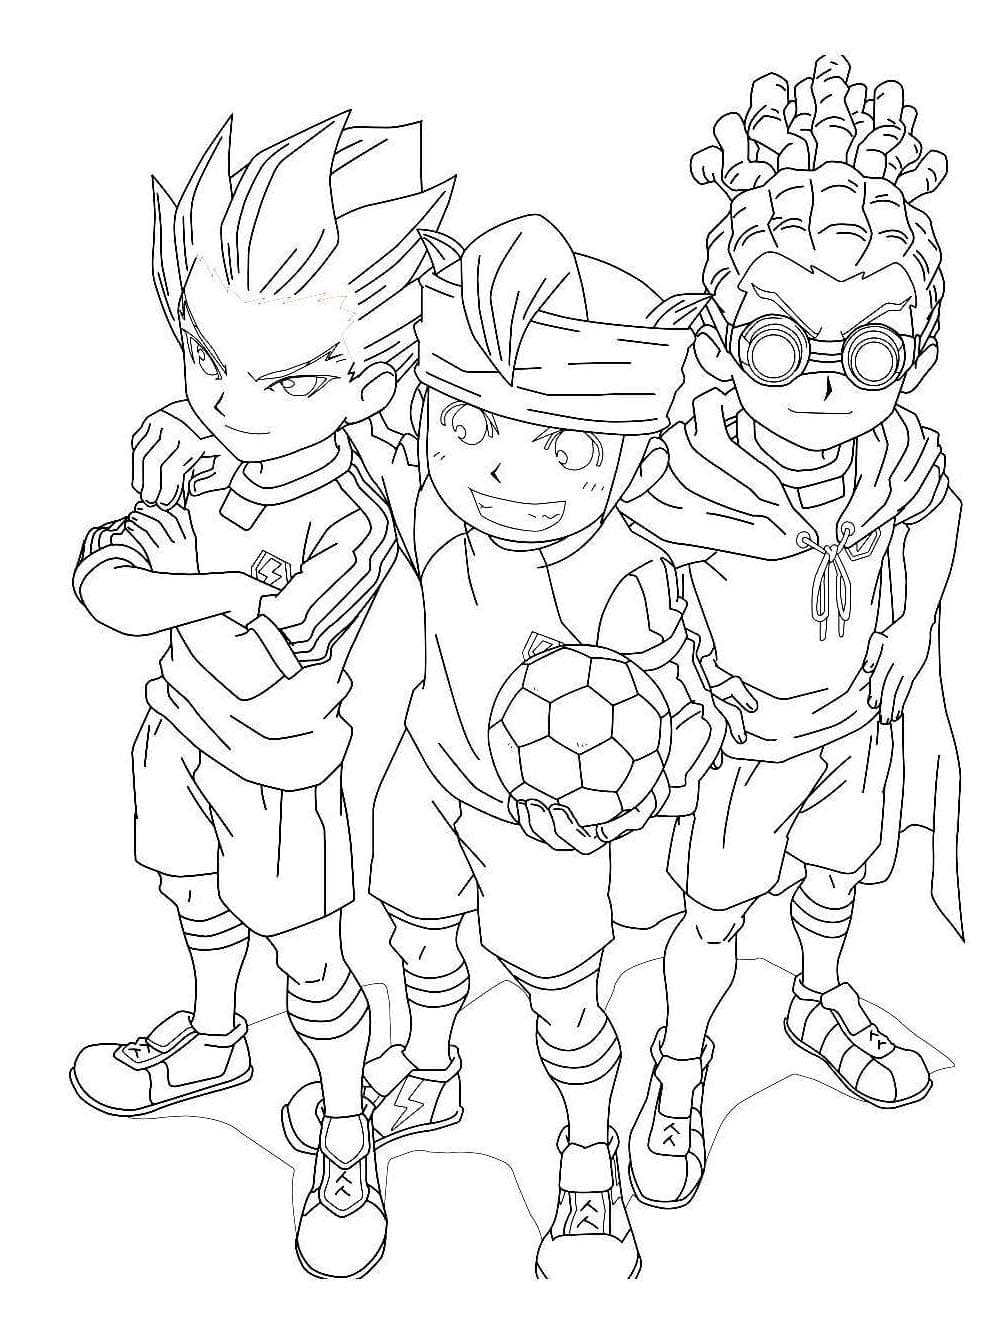 Printable Inazuma Eleven Coloring Pages